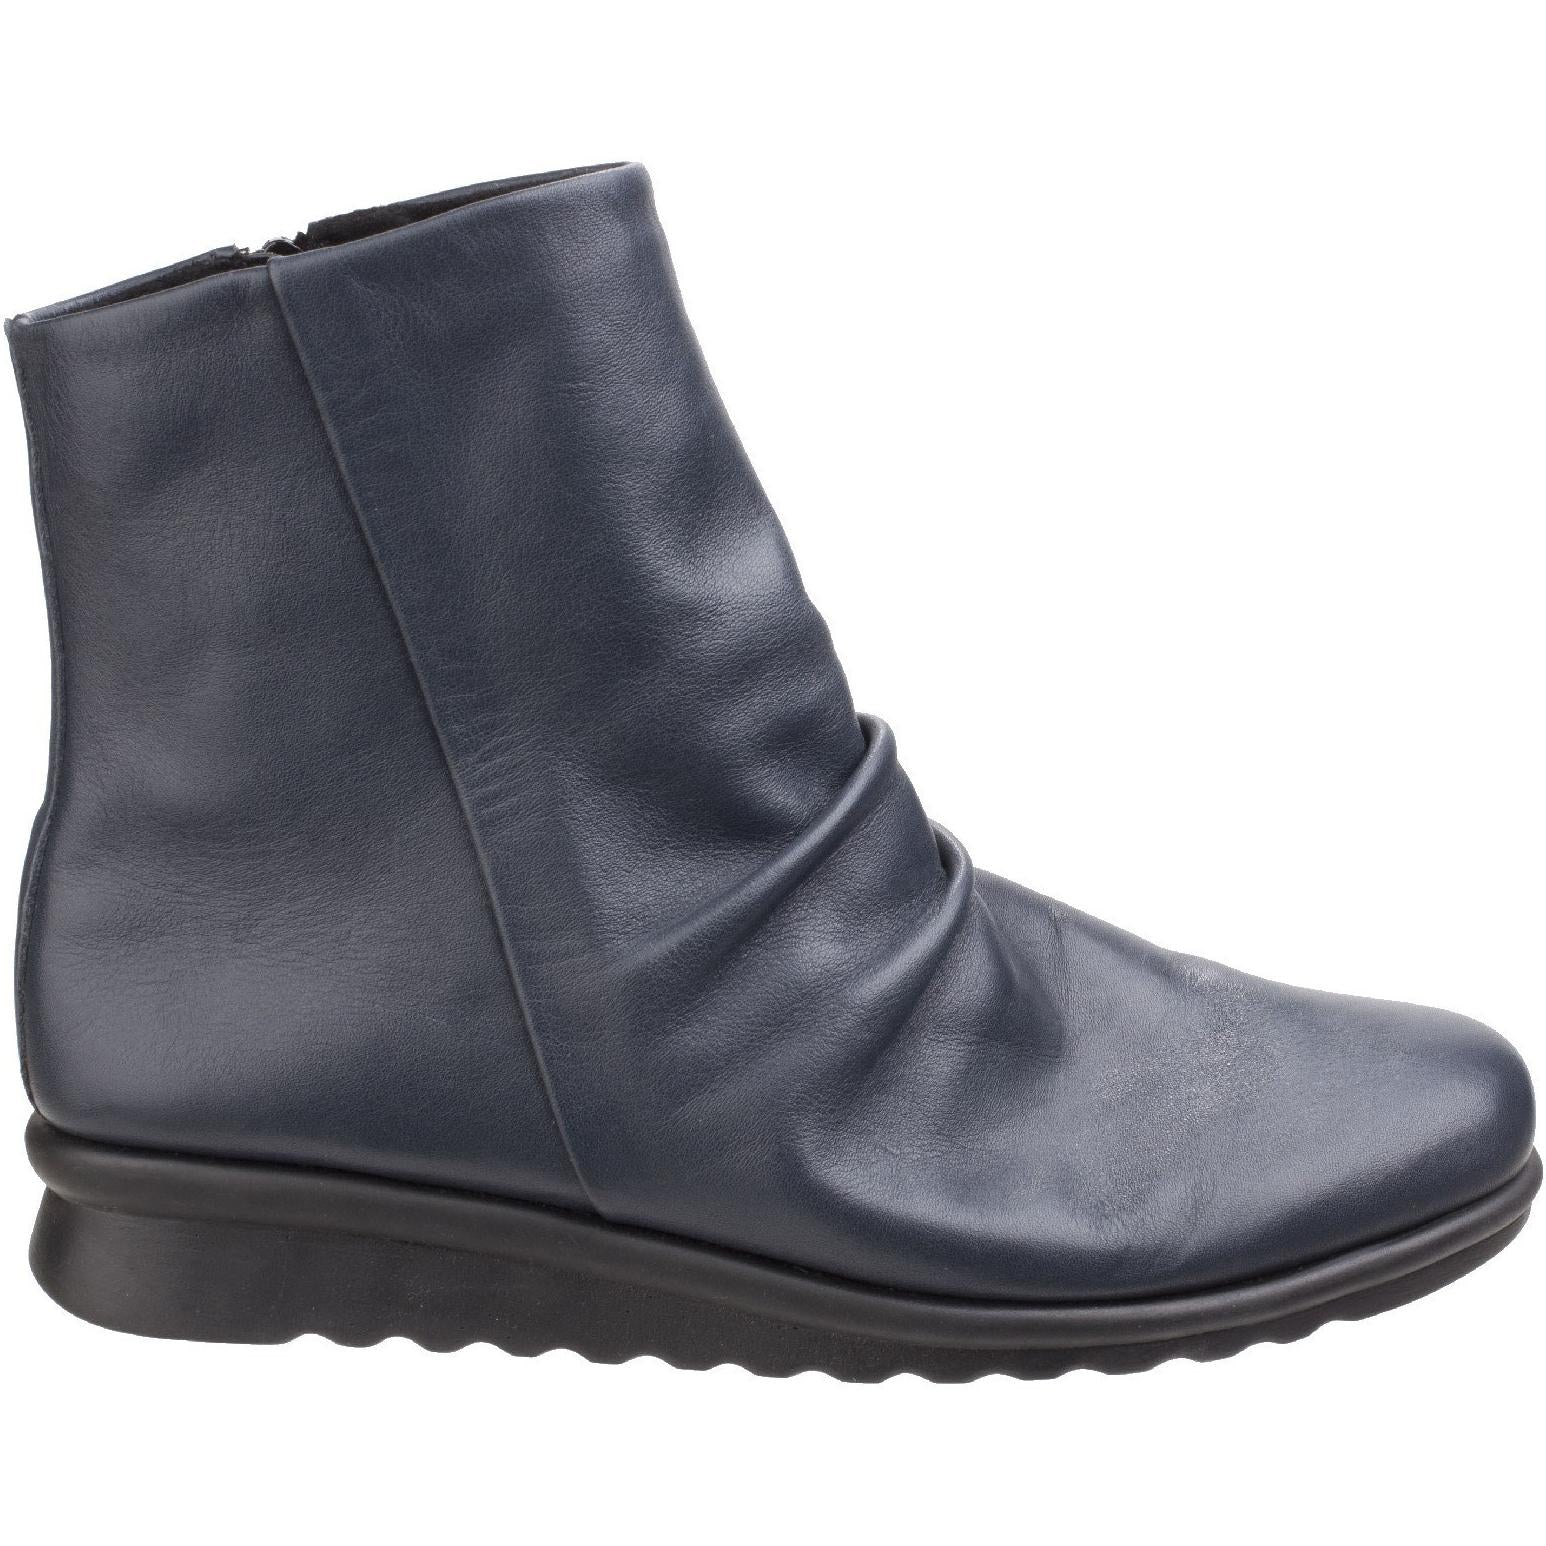 The Flexx Pan Fried Ruched Boot